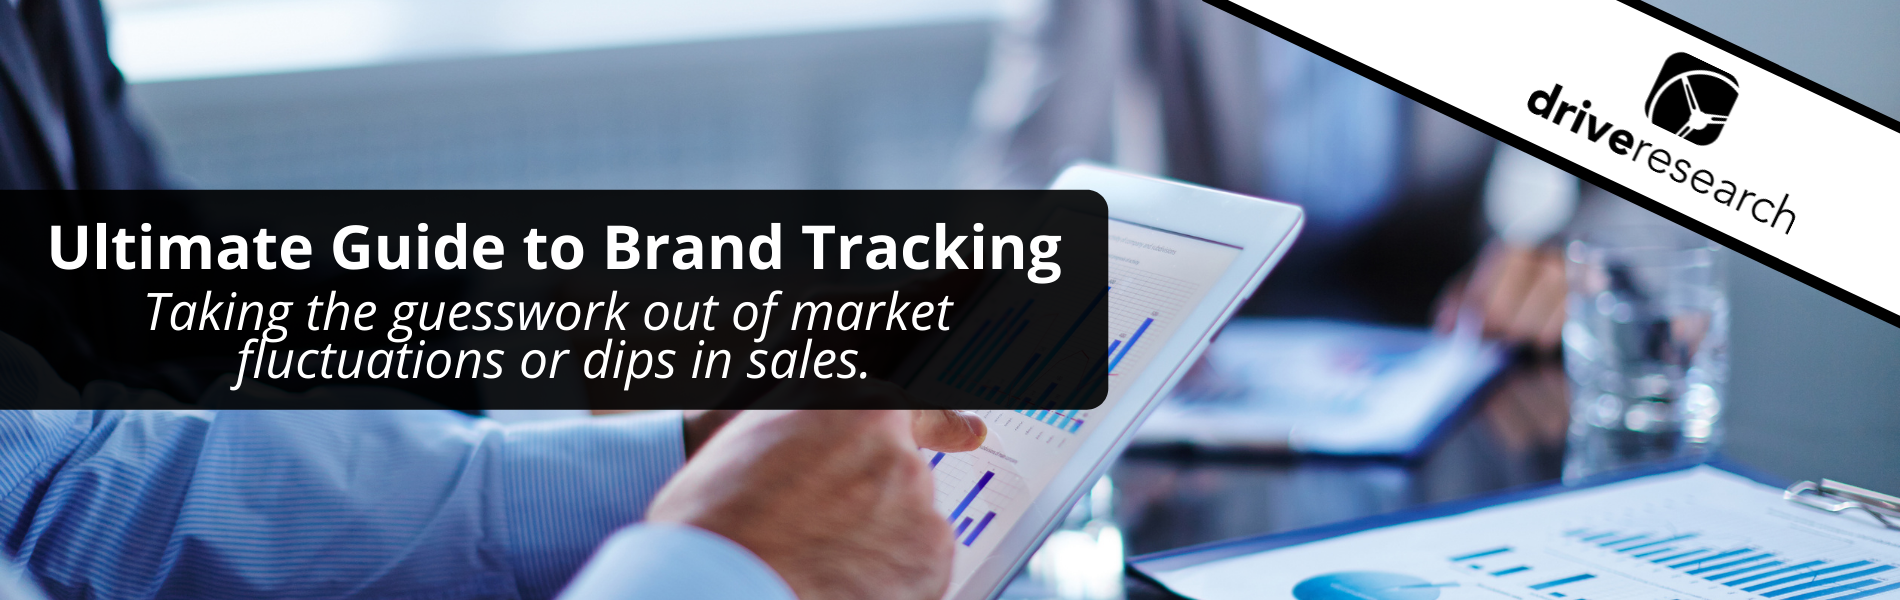 Ultimate Guide to Brand Tracking